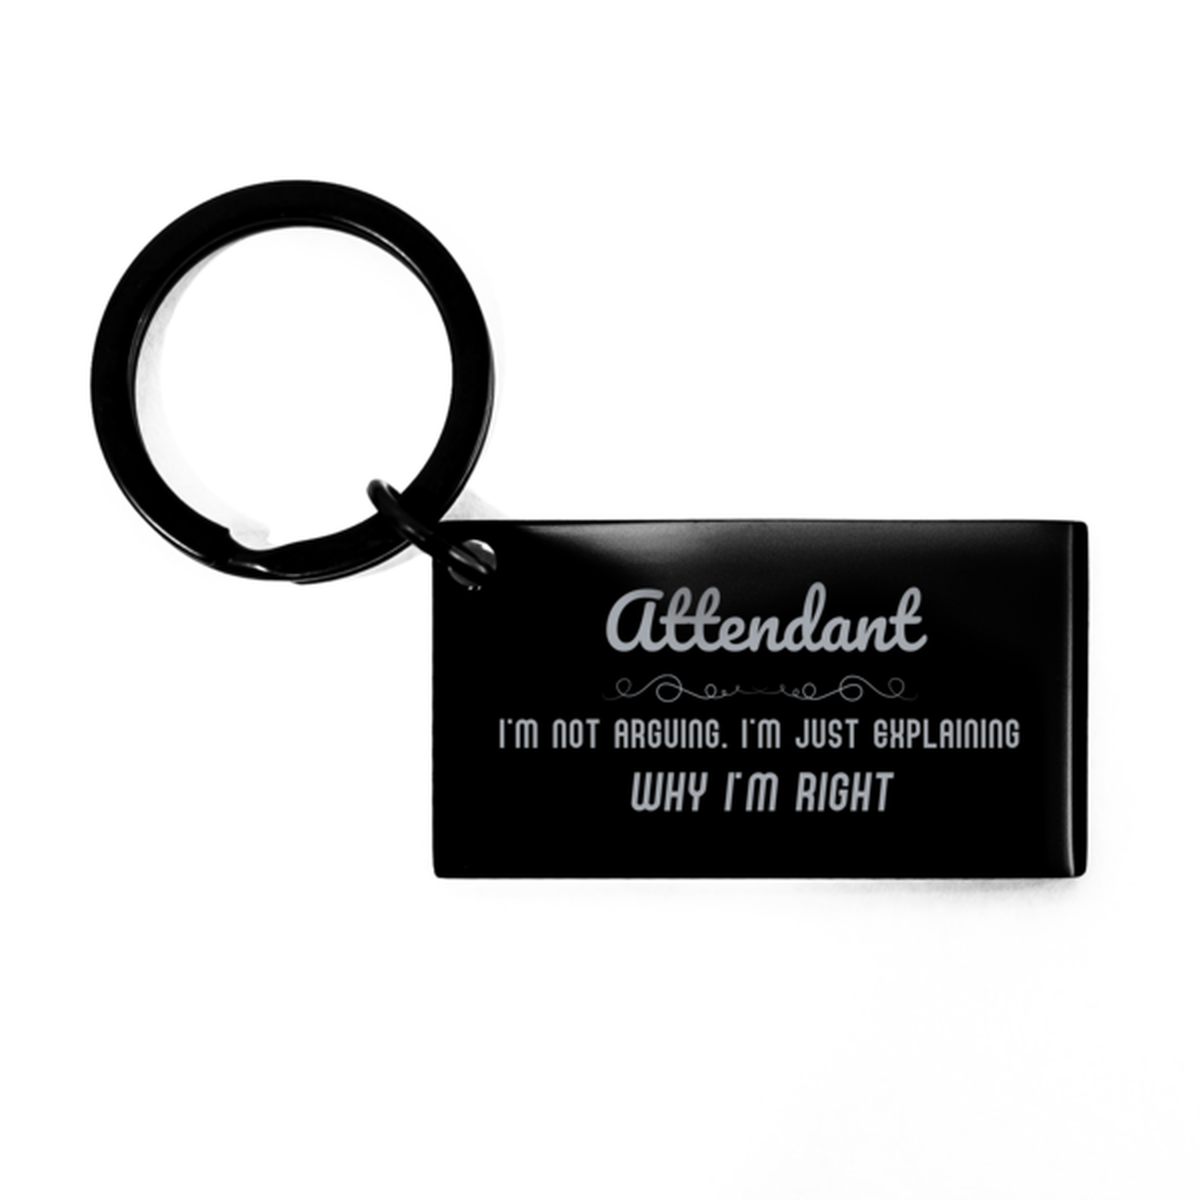 Attendant I'm not Arguing. I'm Just Explaining Why I'm RIGHT Keychain, Funny Saying Quote Attendant Gifts For Attendant Graduation Birthday Christmas Gifts for Men Women Coworker